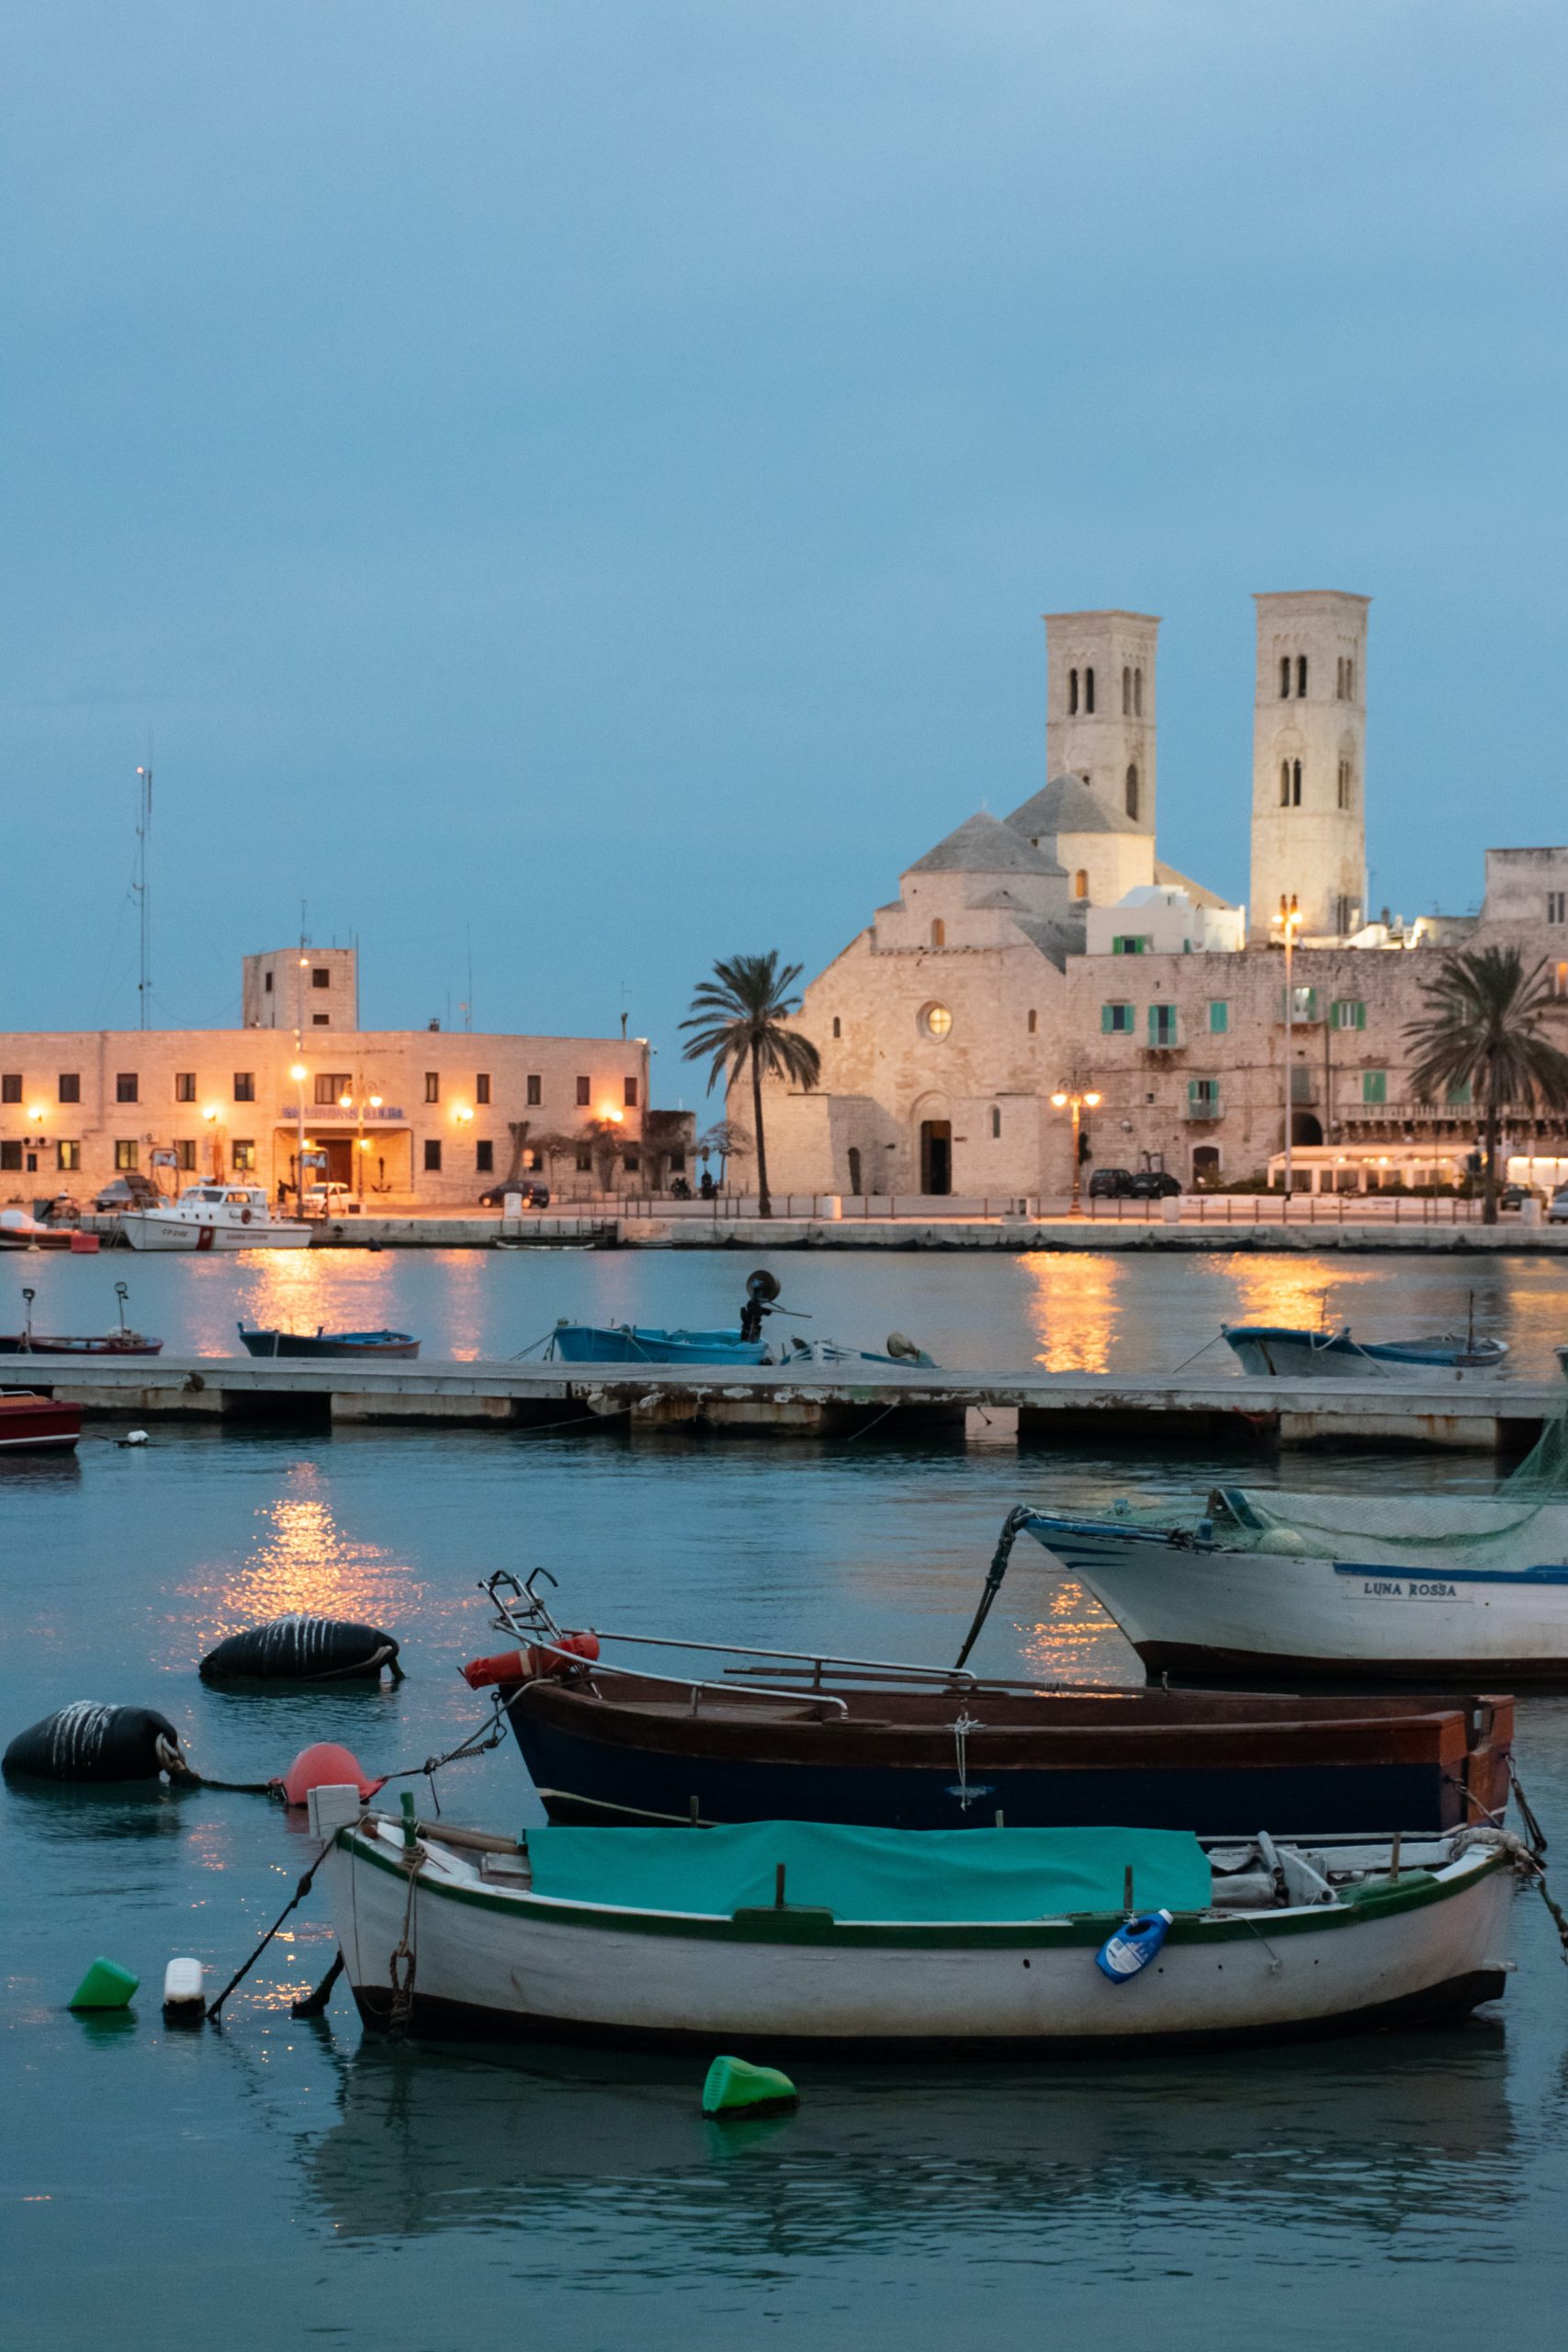 puglia in southern italy